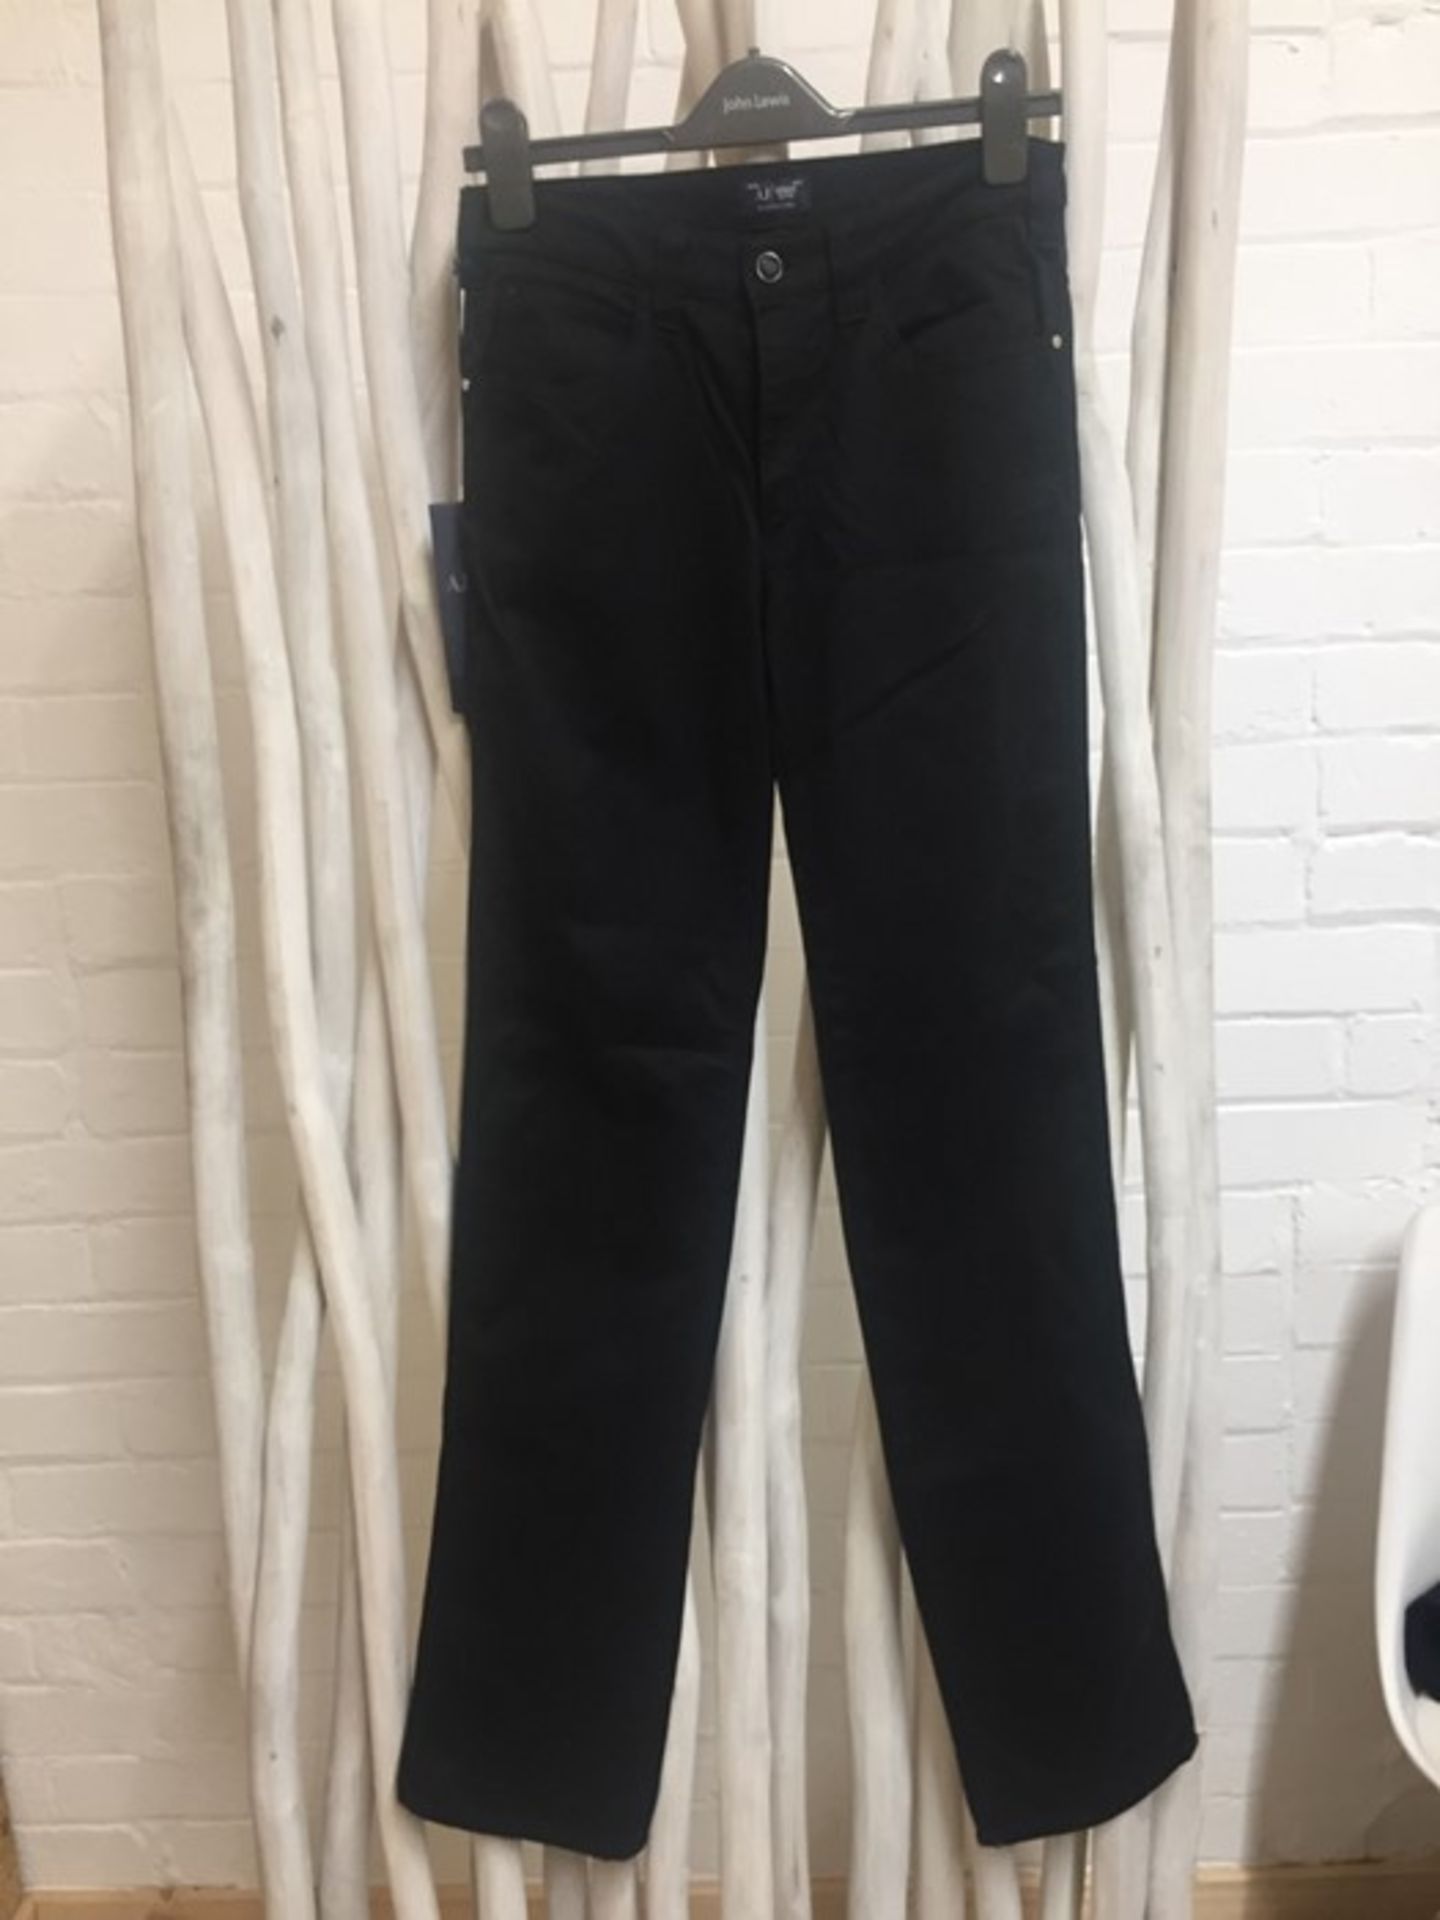 1 ARMANI JEANS REGULAR FIT J75 NERO BLACK JEANS IN W30 / RRP £145.00 (PUBLIC VIEWING AVAILABLE)